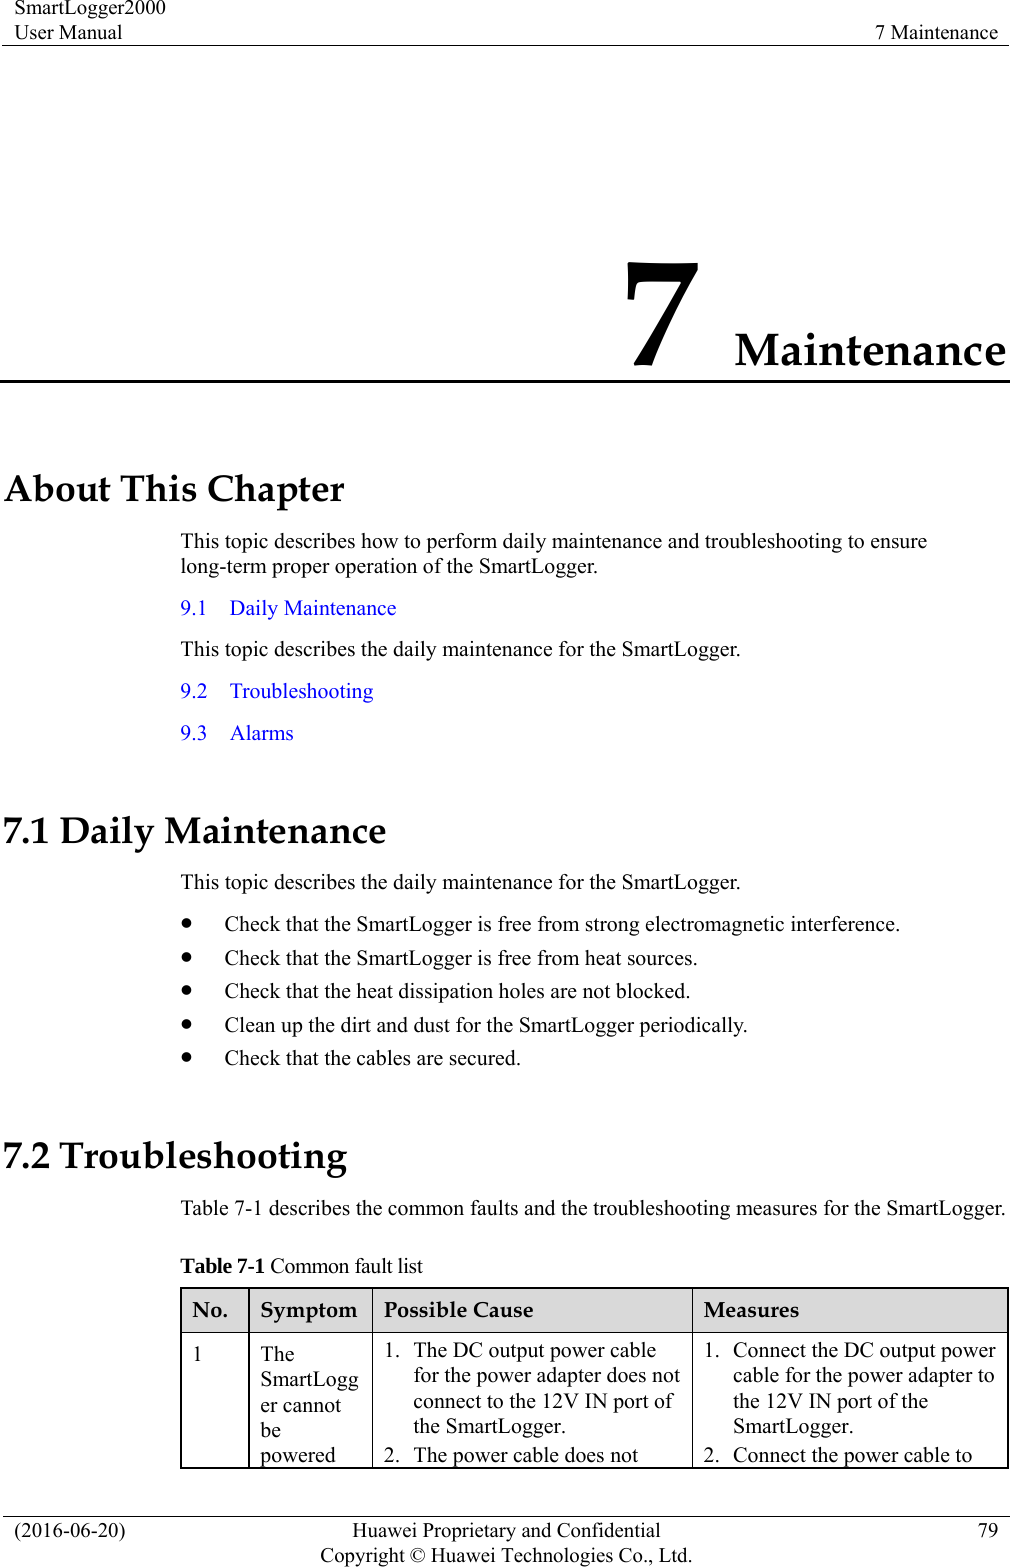 SmartLogger2000 User Manual  7 Maintenance (2016-06-20)  Huawei Proprietary and Confidential         Copyright © Huawei Technologies Co., Ltd.79 7 Maintenance About This Chapter This topic describes how to perform daily maintenance and troubleshooting to ensure long-term proper operation of the SmartLogger. 9.1  Daily Maintenance This topic describes the daily maintenance for the SmartLogger. 9.2  Troubleshooting 9.3  Alarms 7.1 Daily Maintenance This topic describes the daily maintenance for the SmartLogger.  Check that the SmartLogger is free from strong electromagnetic interference.  Check that the SmartLogger is free from heat sources.  Check that the heat dissipation holes are not blocked.    Clean up the dirt and dust for the SmartLogger periodically.  Check that the cables are secured. 7.2 Troubleshooting Table 7-1 describes the common faults and the troubleshooting measures for the SmartLogger.   Table 7-1 Common fault list No.  Symptom  Possible Cause  Measures 1 The SmartLogger cannot be powered 1. The DC output power cable for the power adapter does not connect to the 12V IN port of the SmartLogger. 2. The power cable does not 1. Connect the DC output power cable for the power adapter to the 12V IN port of the SmartLogger. 2. Connect the power cable to 